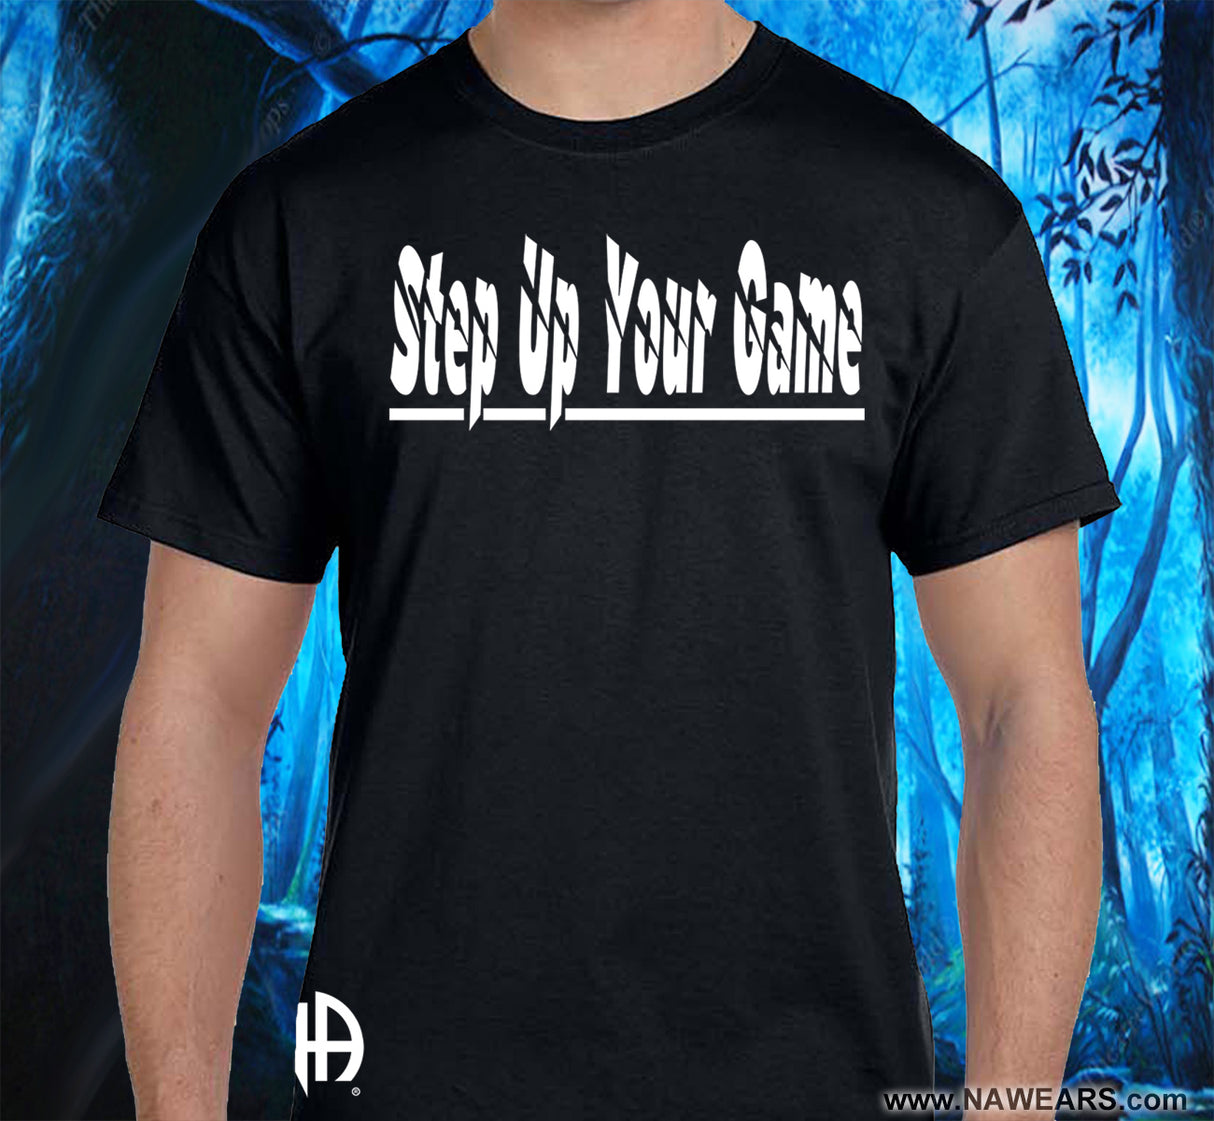 Step Up Your Game   SS/LS Tee